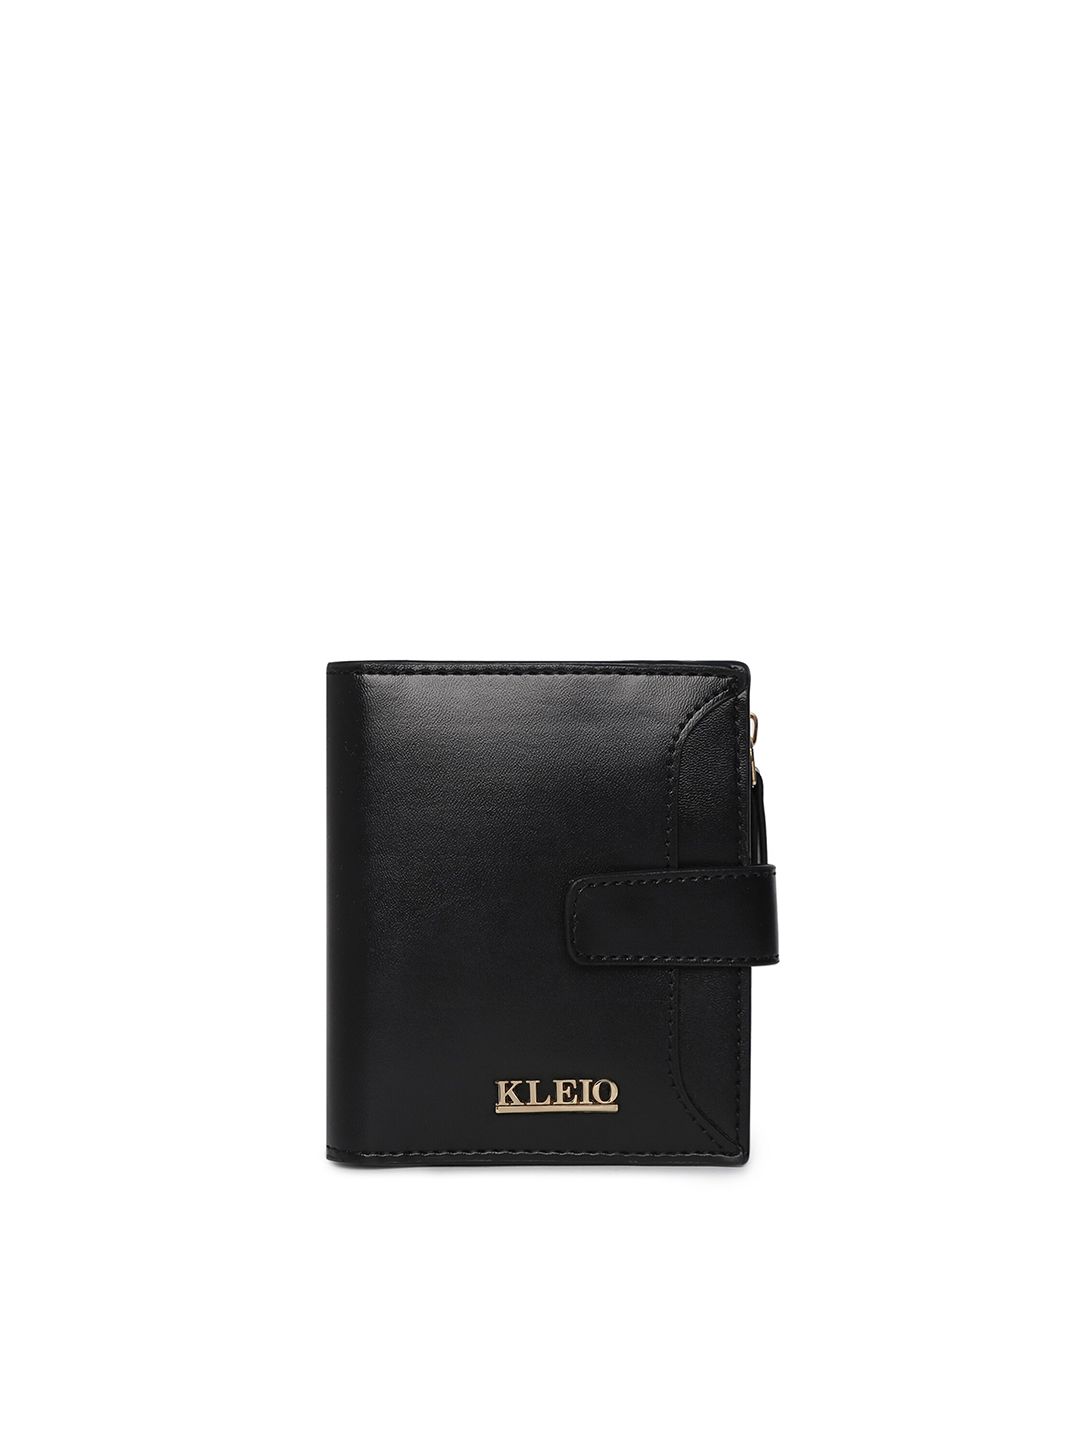 KLEIO Women Black Solid Synthetic Leather Zip Around Wallet Price in India